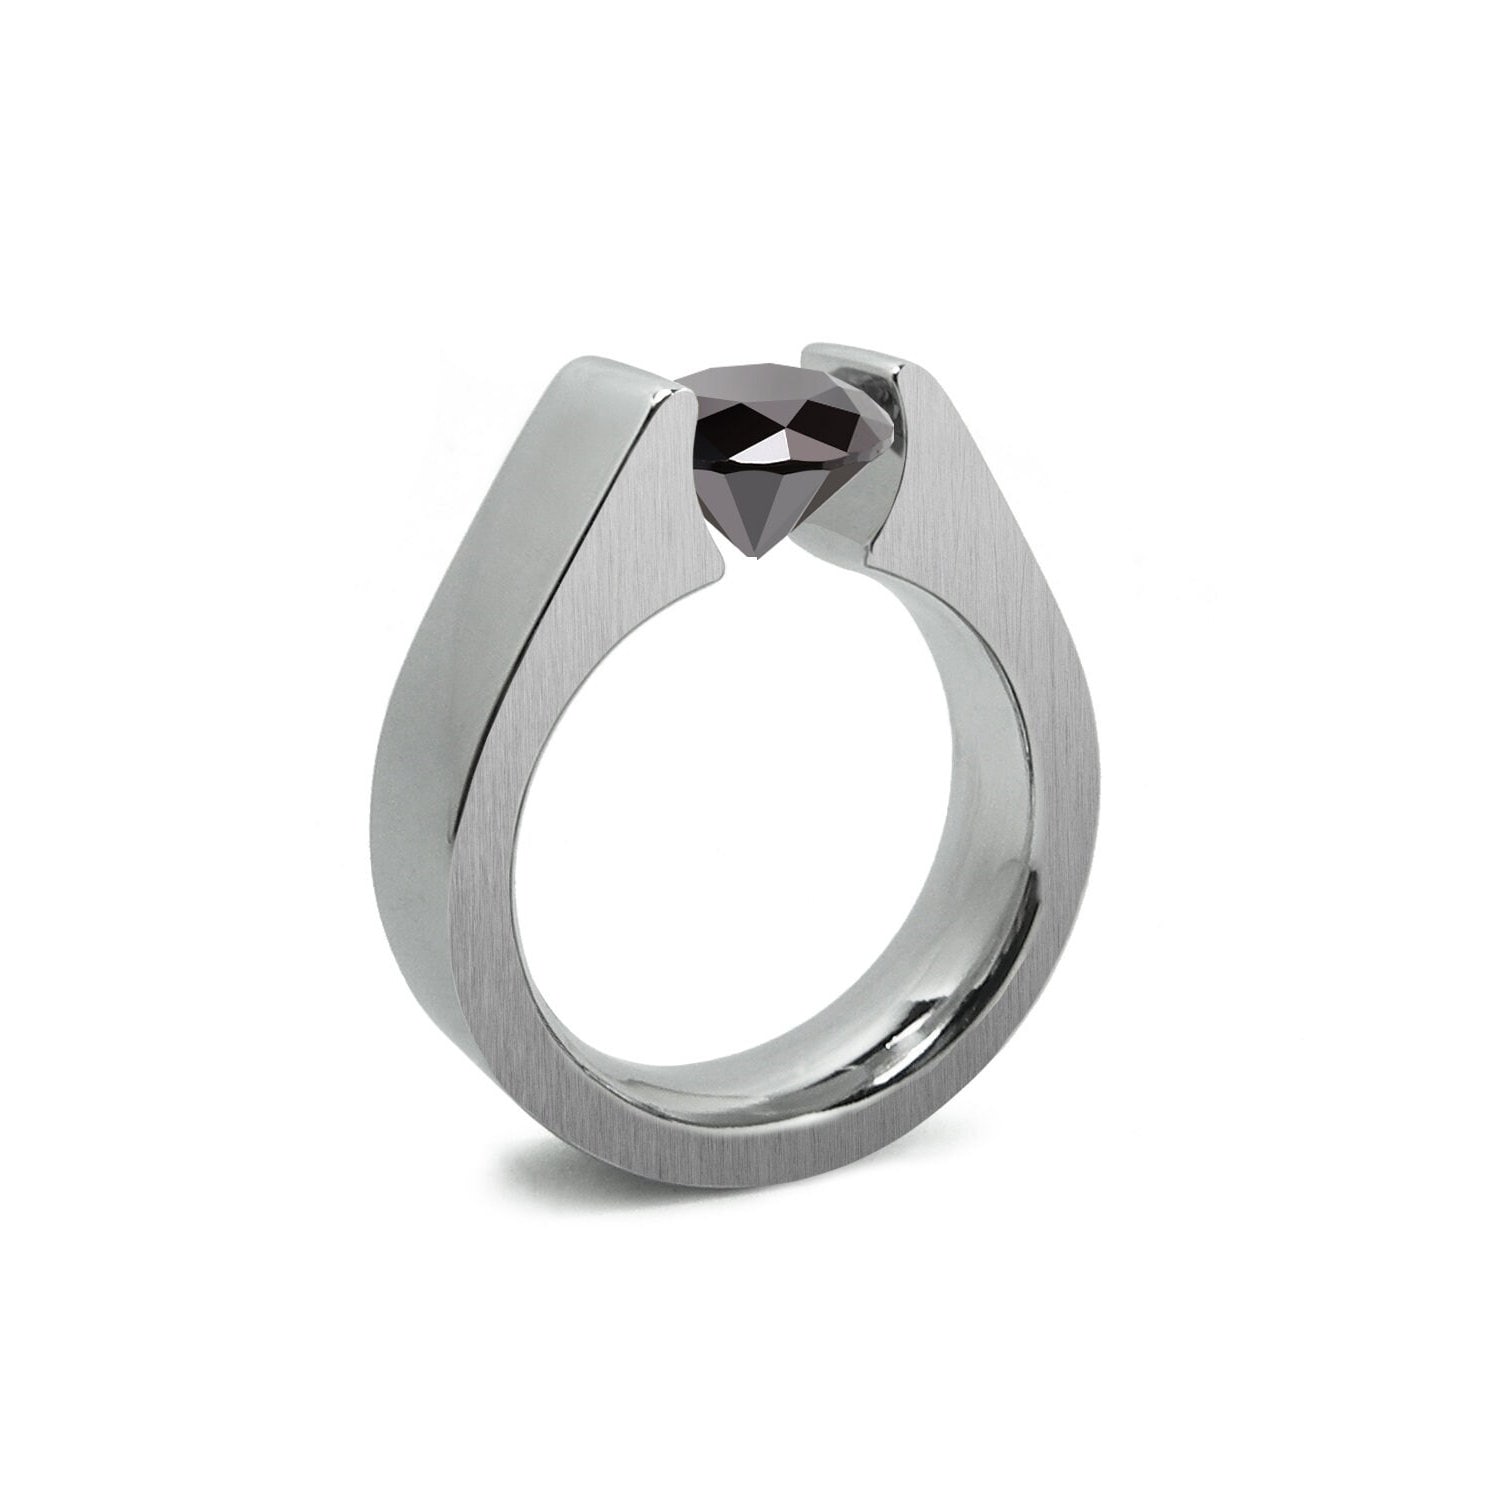 1.5ct Black Onyx Tension Set Steel High setting Engagement Ring by